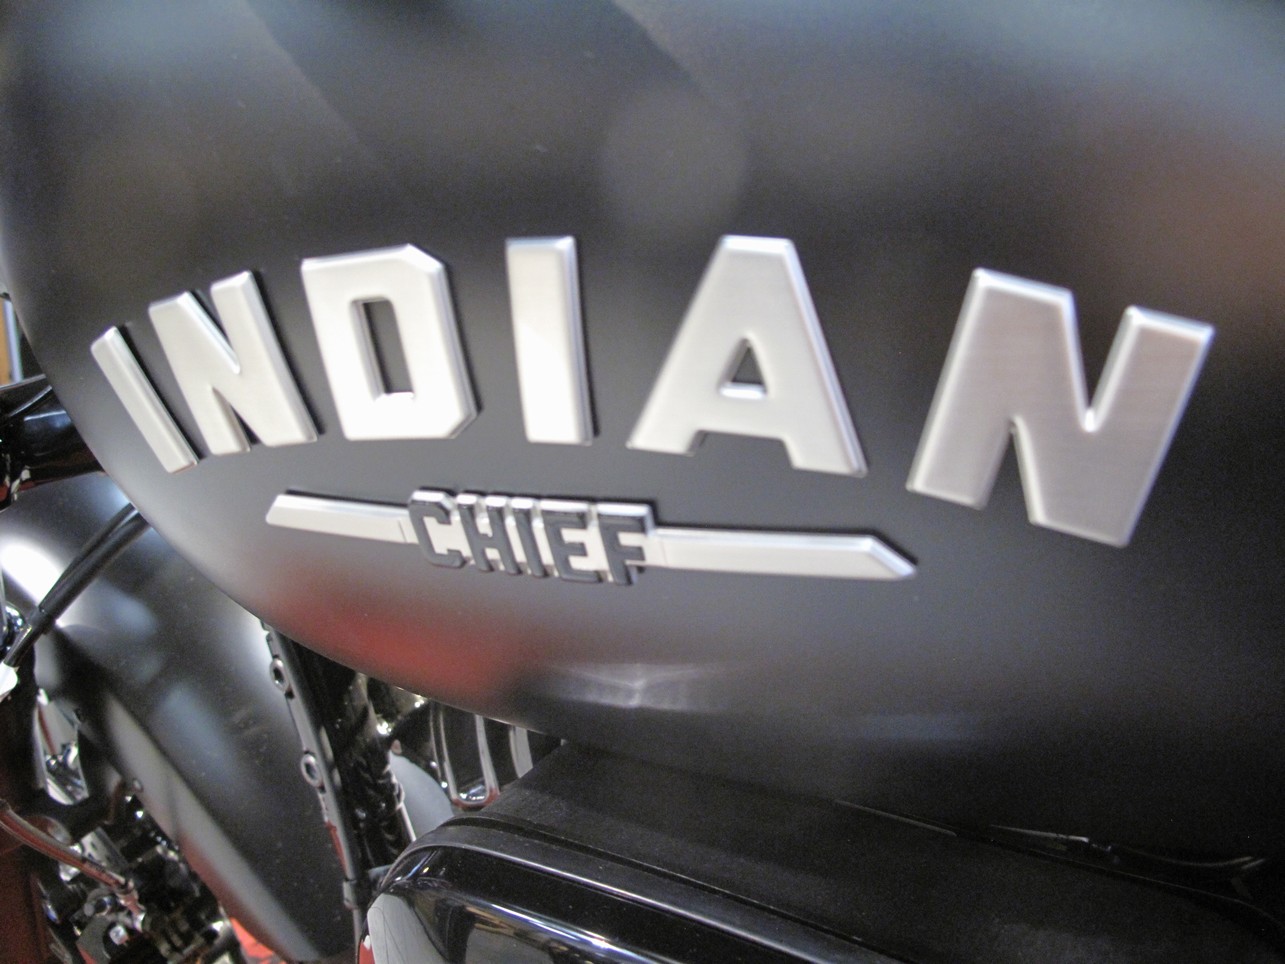 INDIAN Chief Dark Horse Official Indi